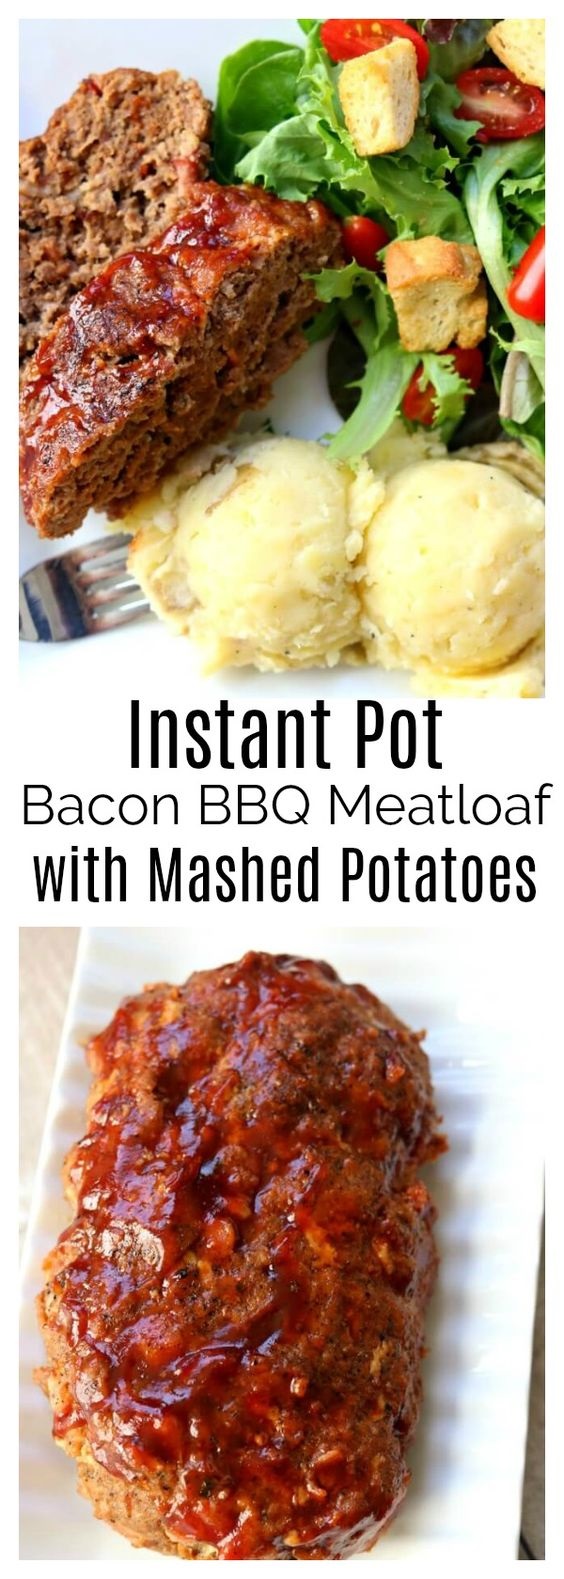 Instant Pot Bacon Barbecue Meatloaf With Mashed Potatoes